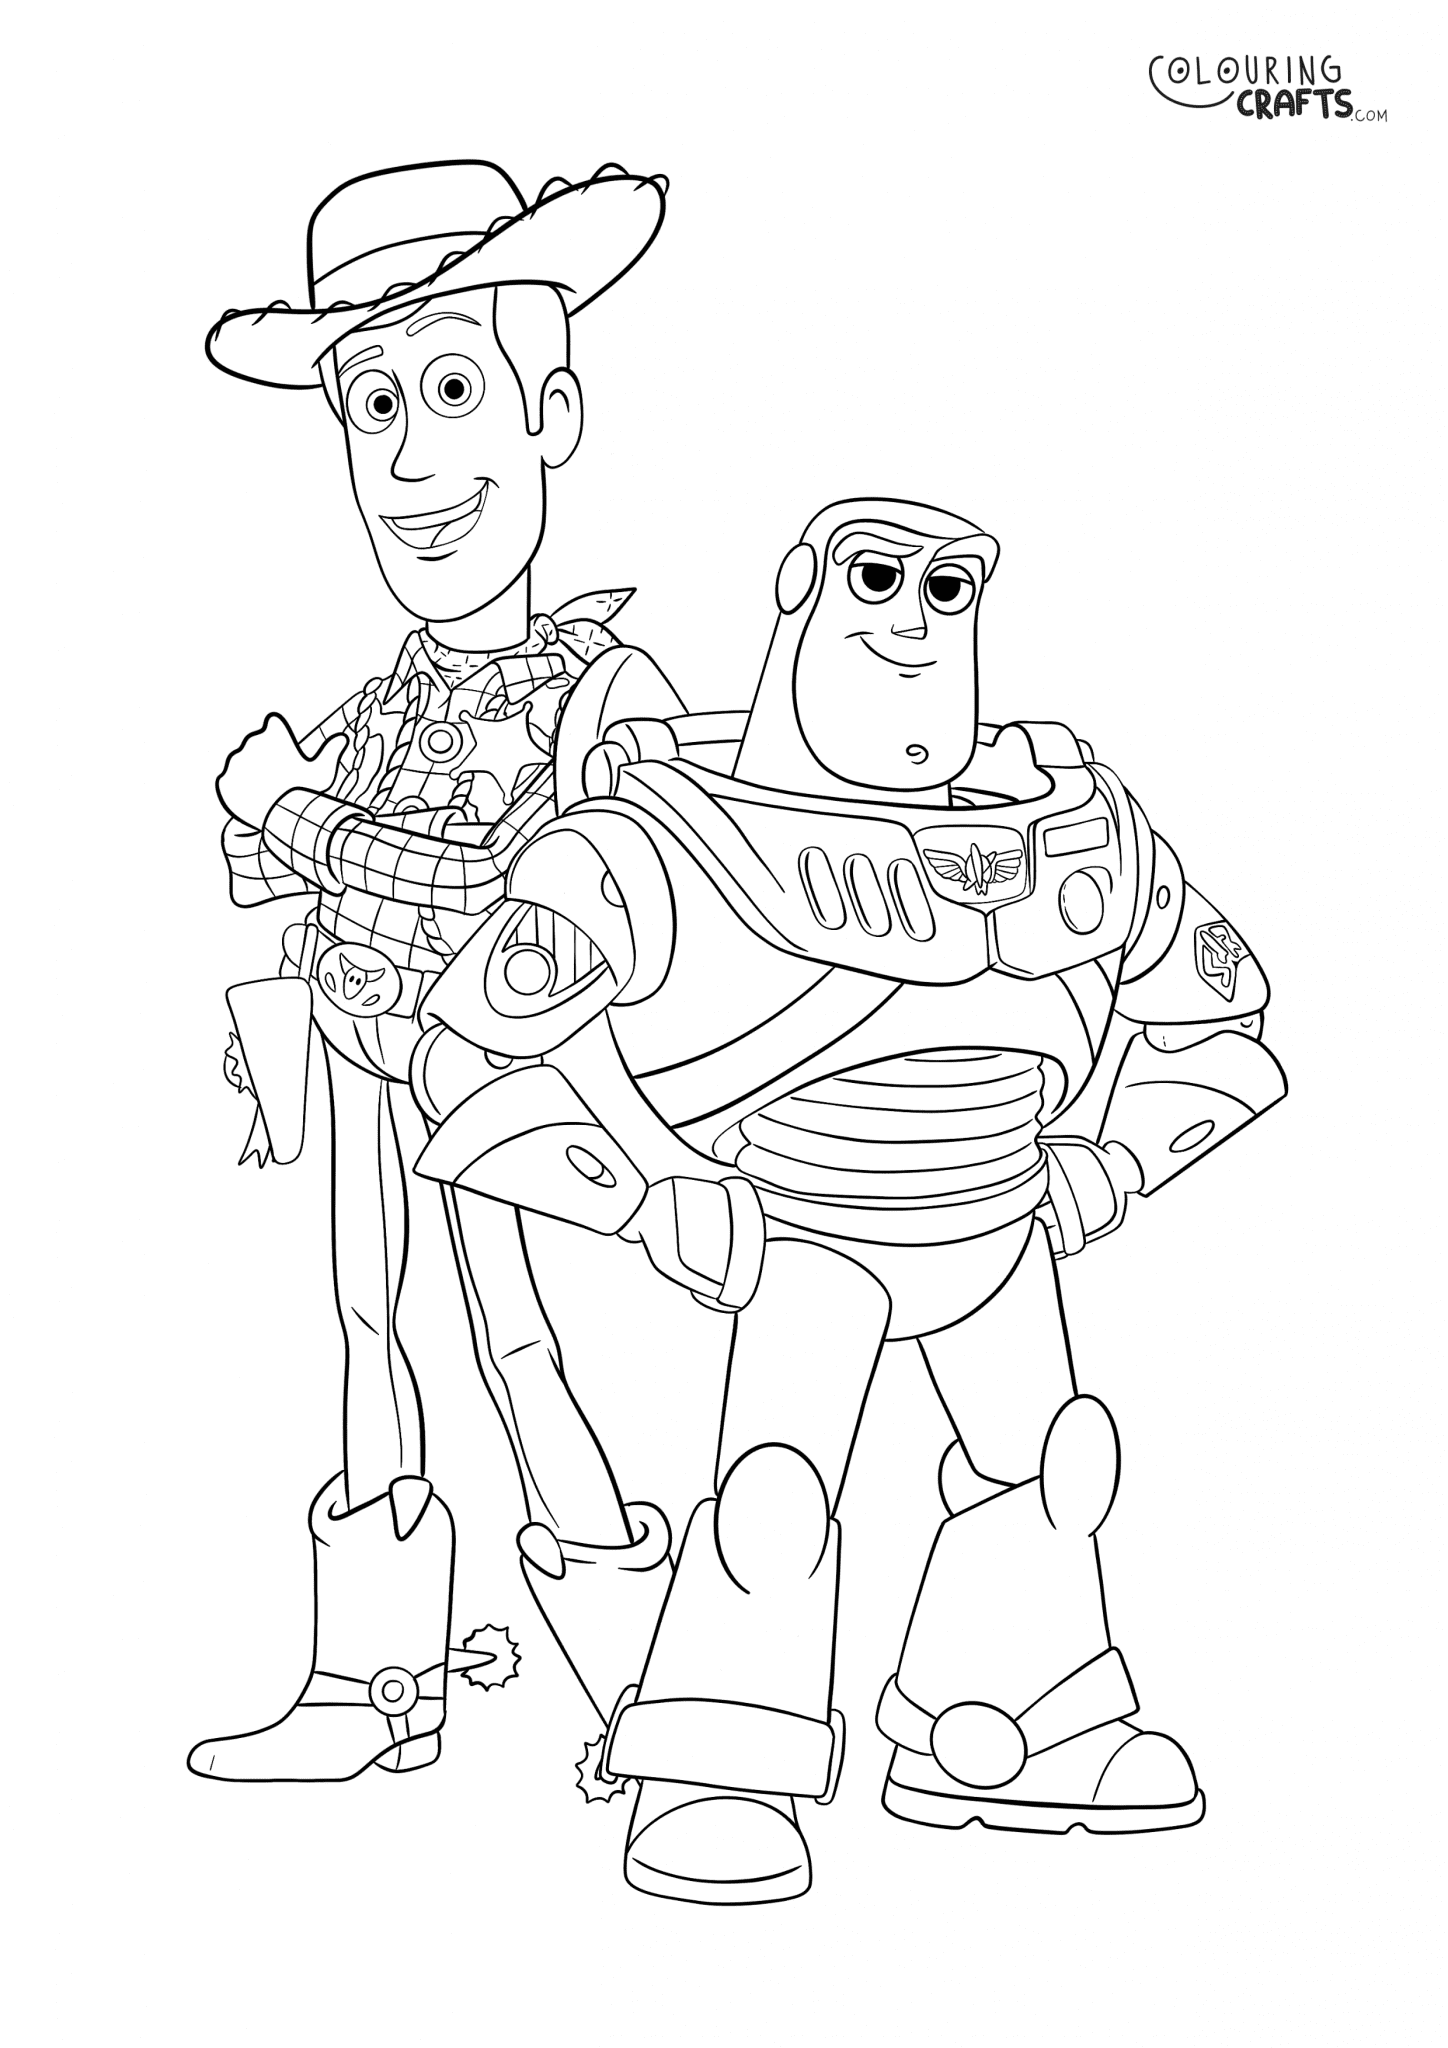 Toy Story Buzz And Woody Colouring Page - Colouring Crafts